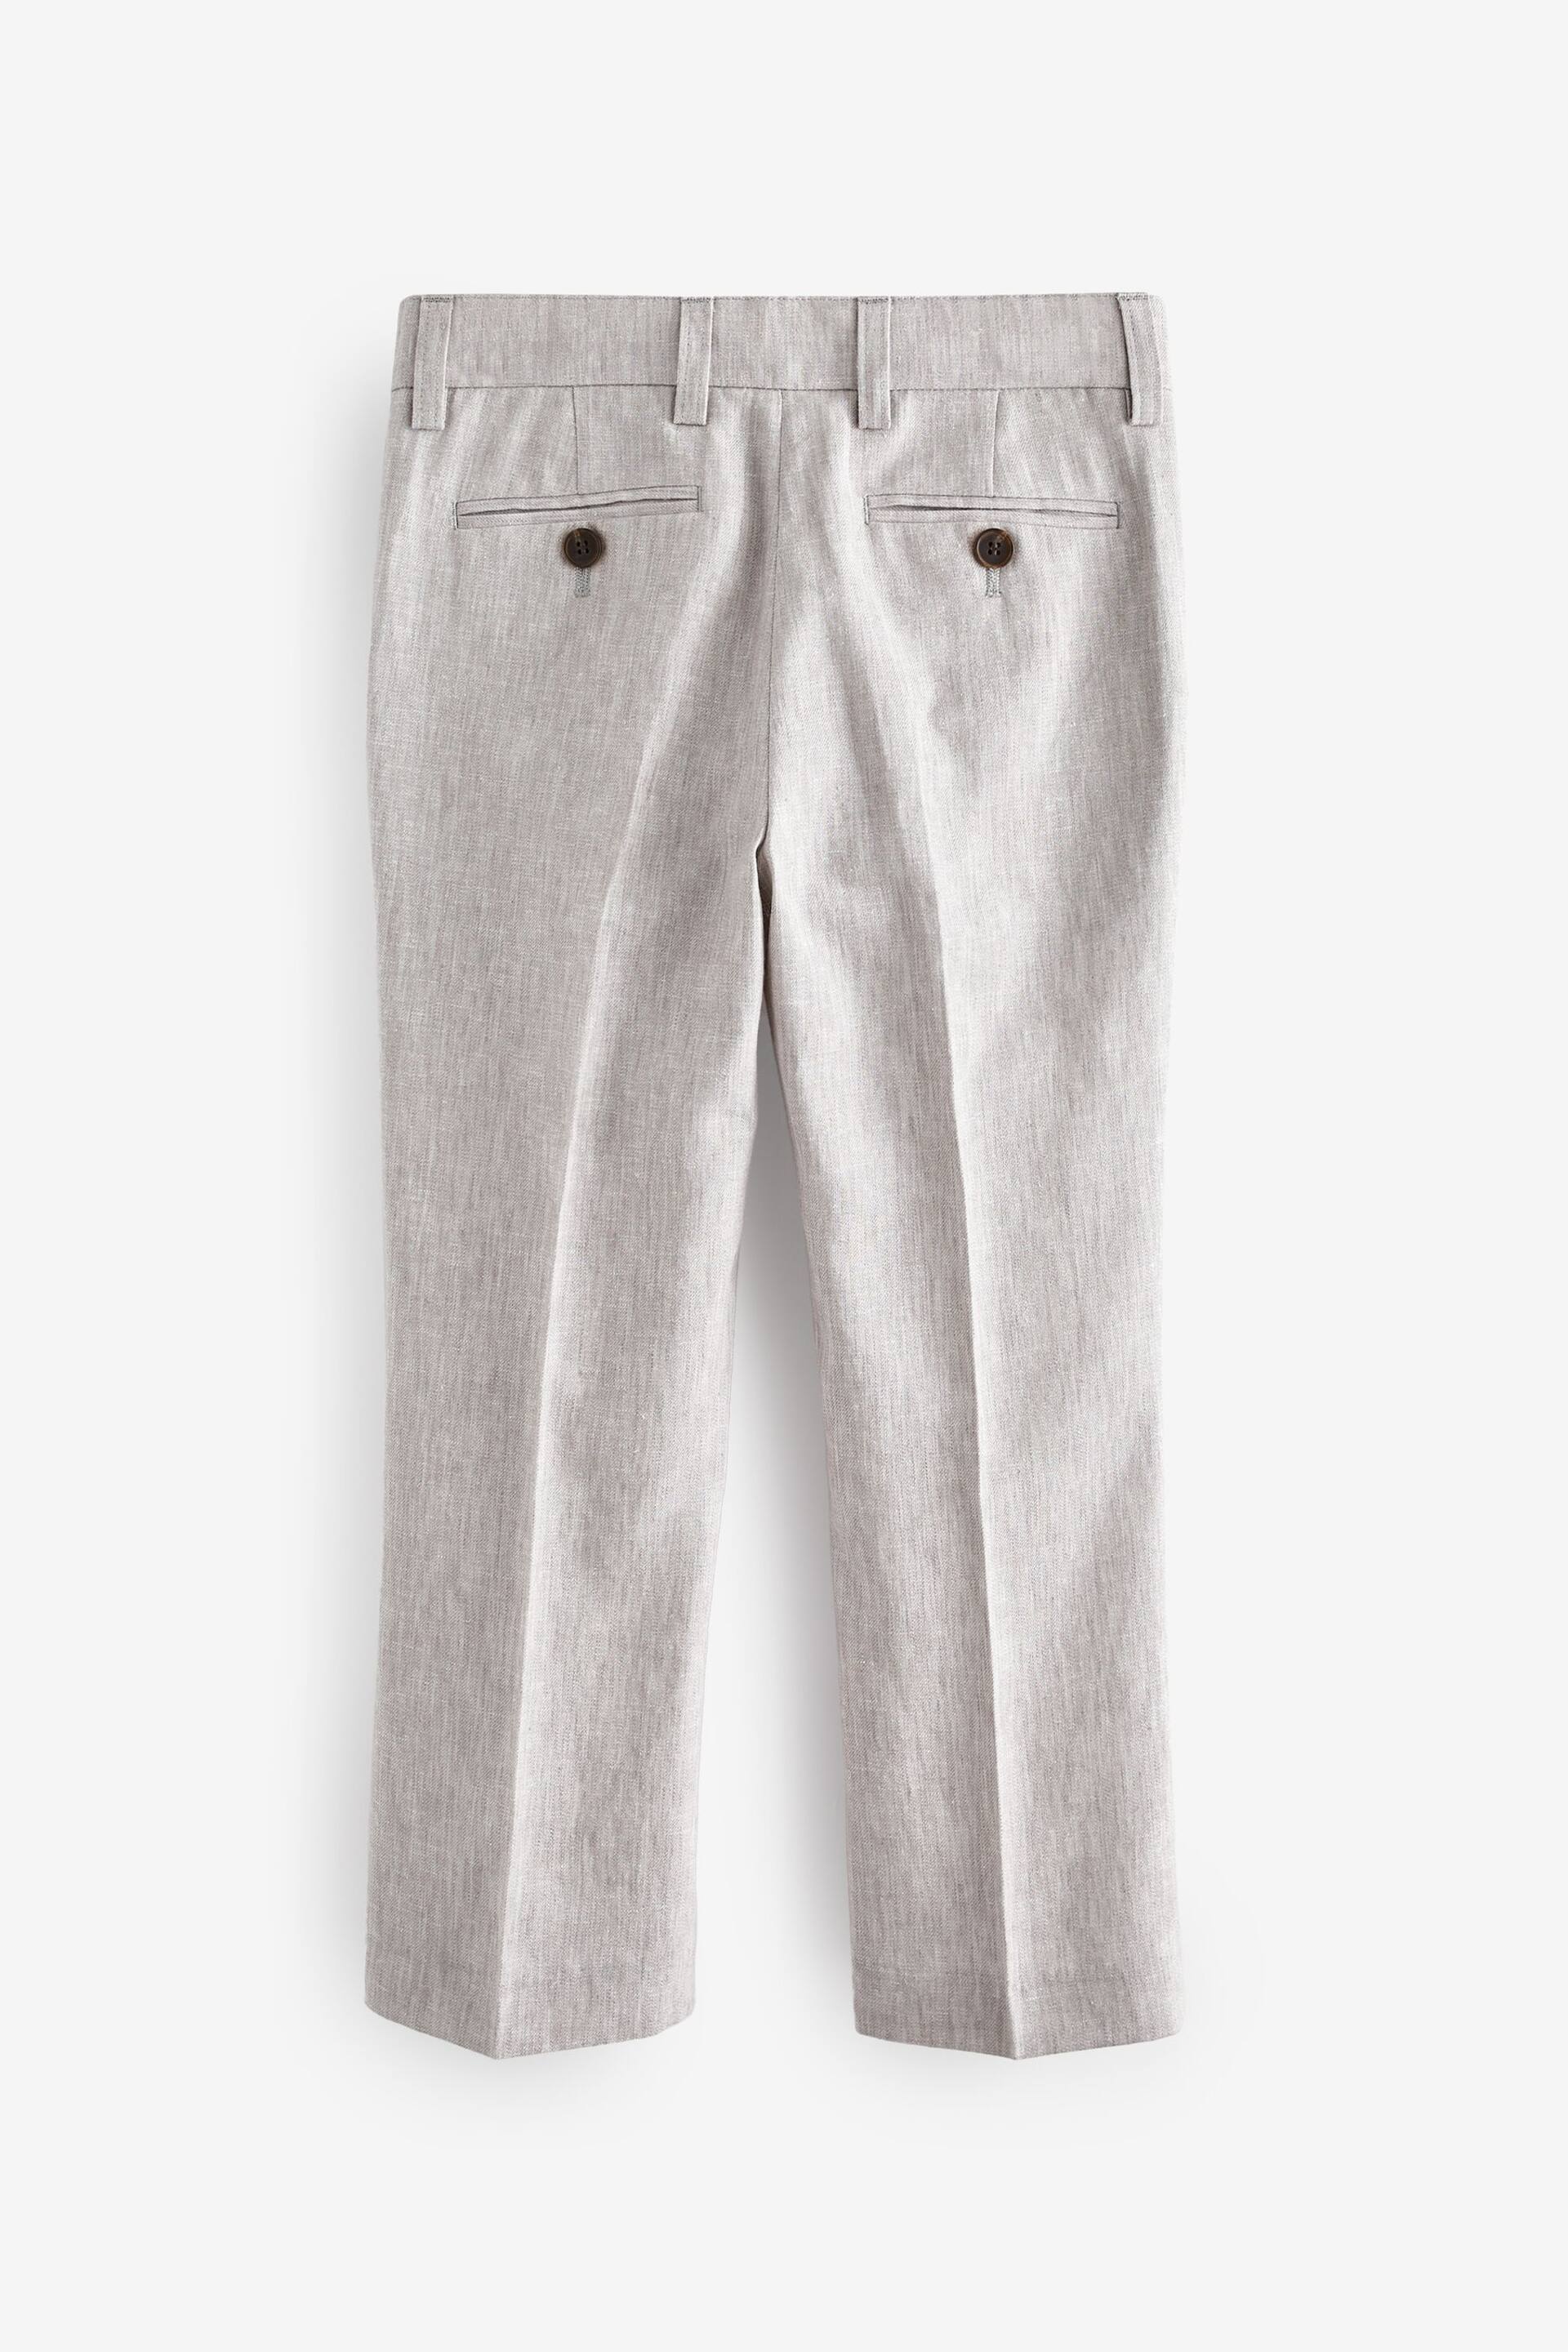 Grey Linen Blend Suit Trousers (12mths-16yrs) - Image 2 of 5